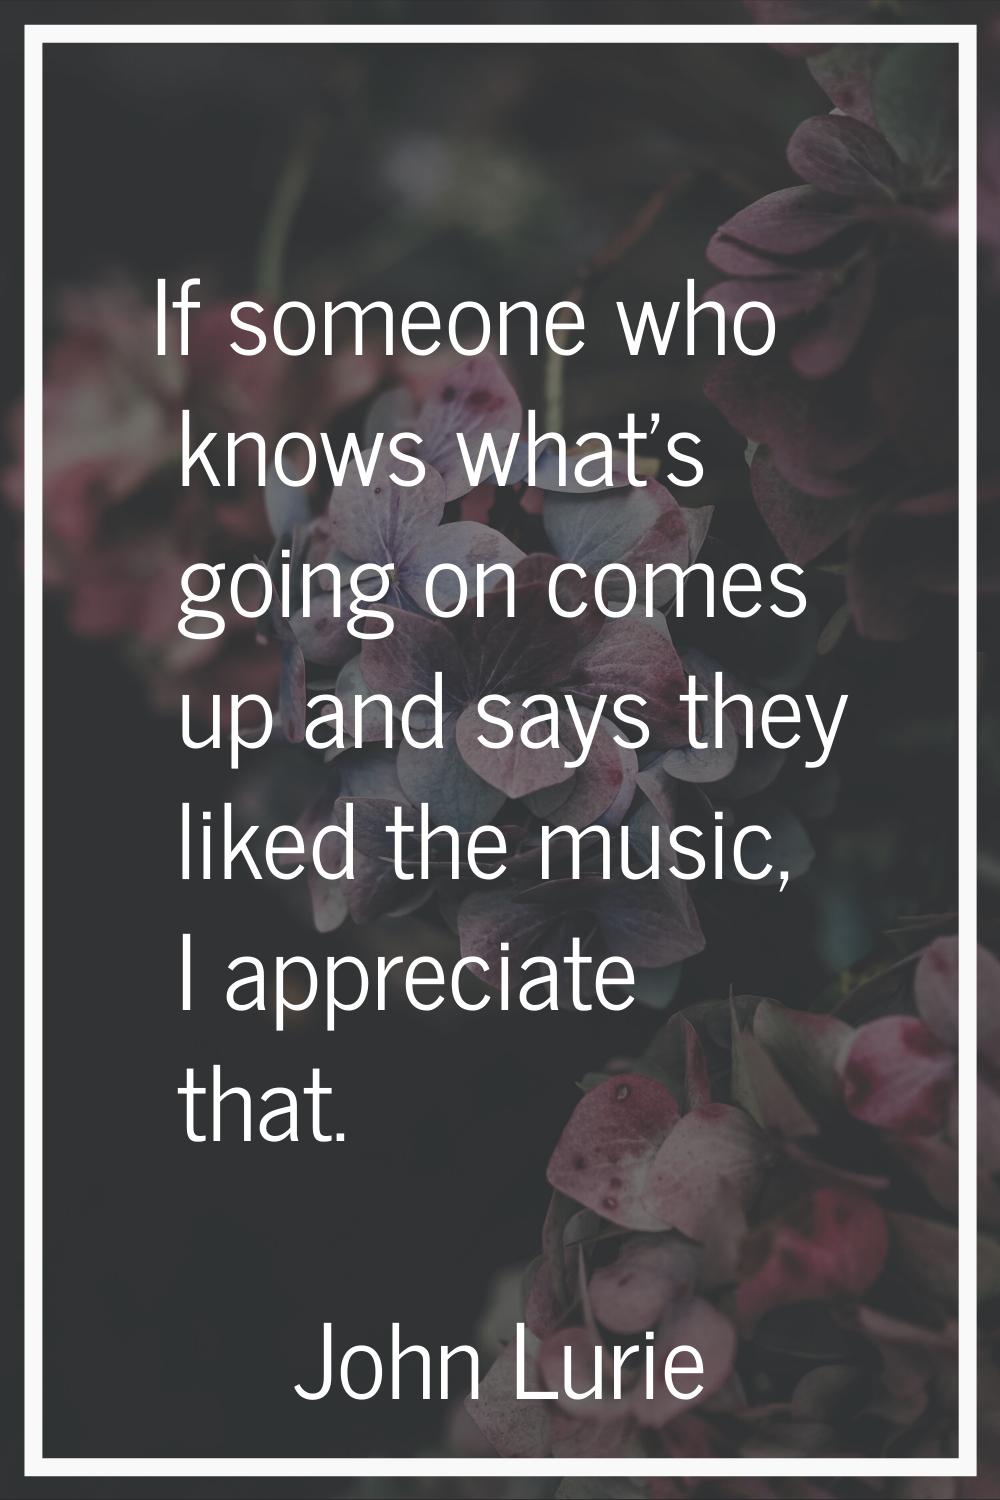 If someone who knows what's going on comes up and says they liked the music, I appreciate that.